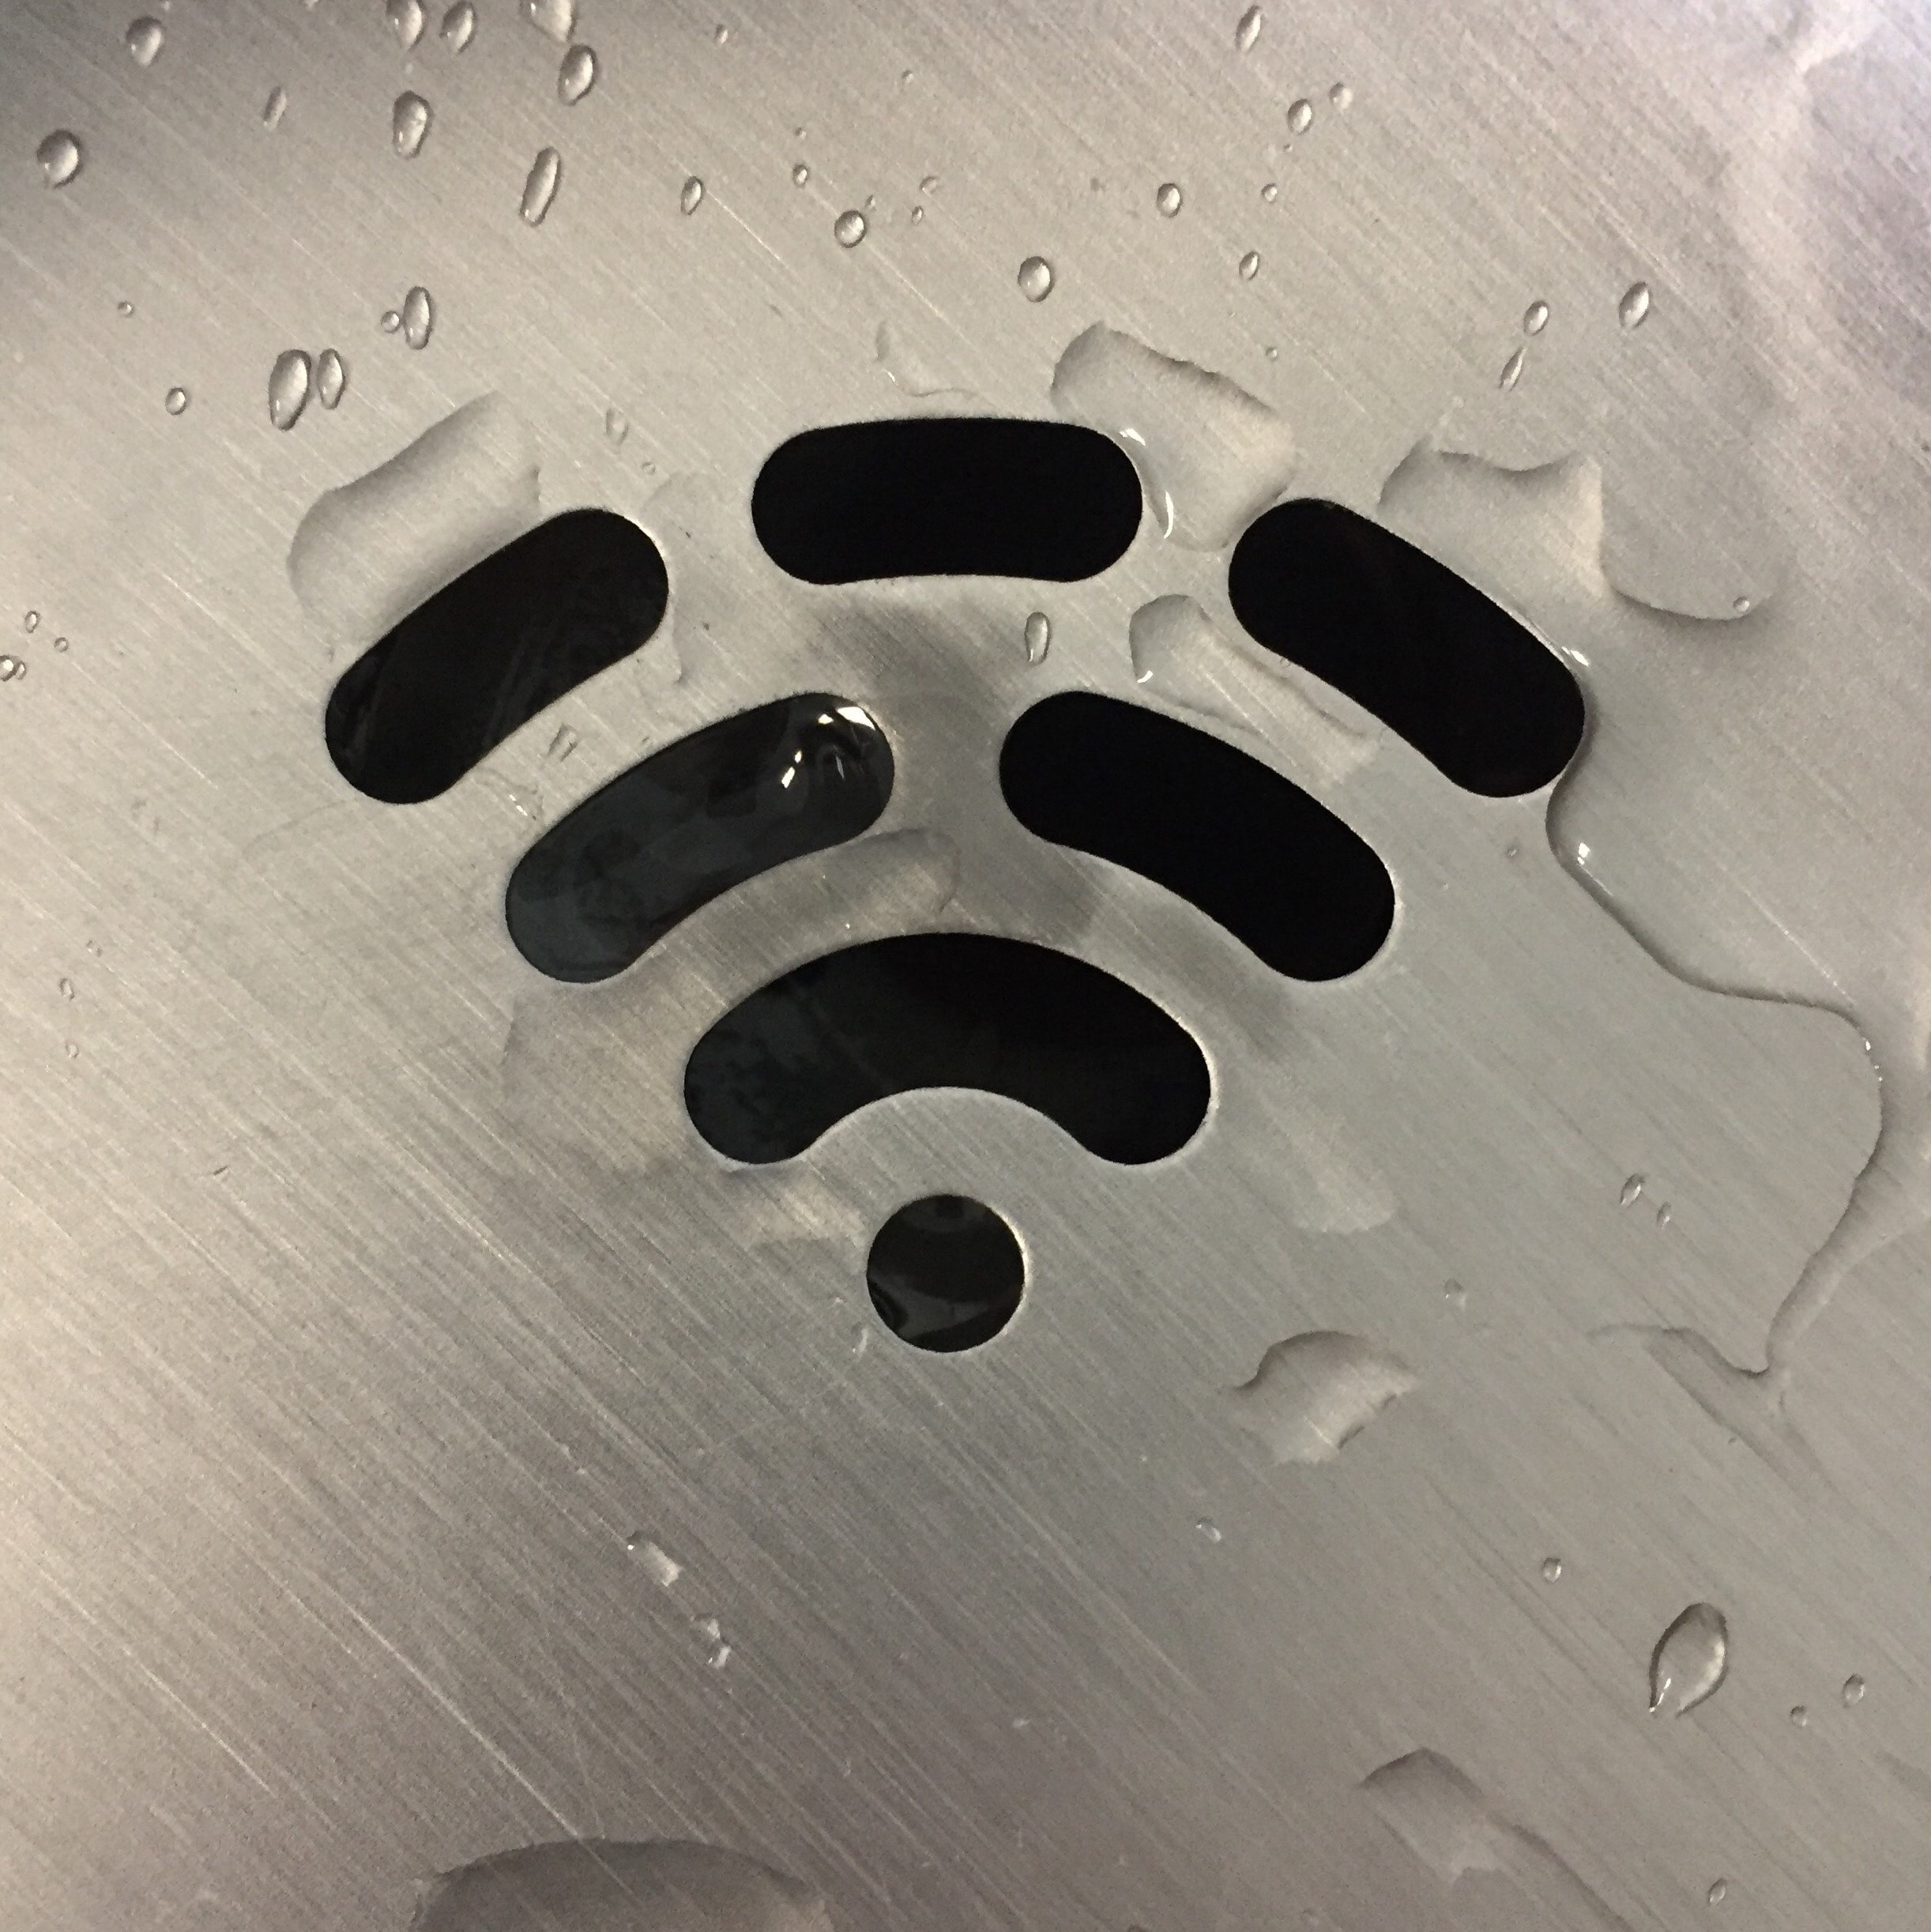 wi-fi for simplified daily life